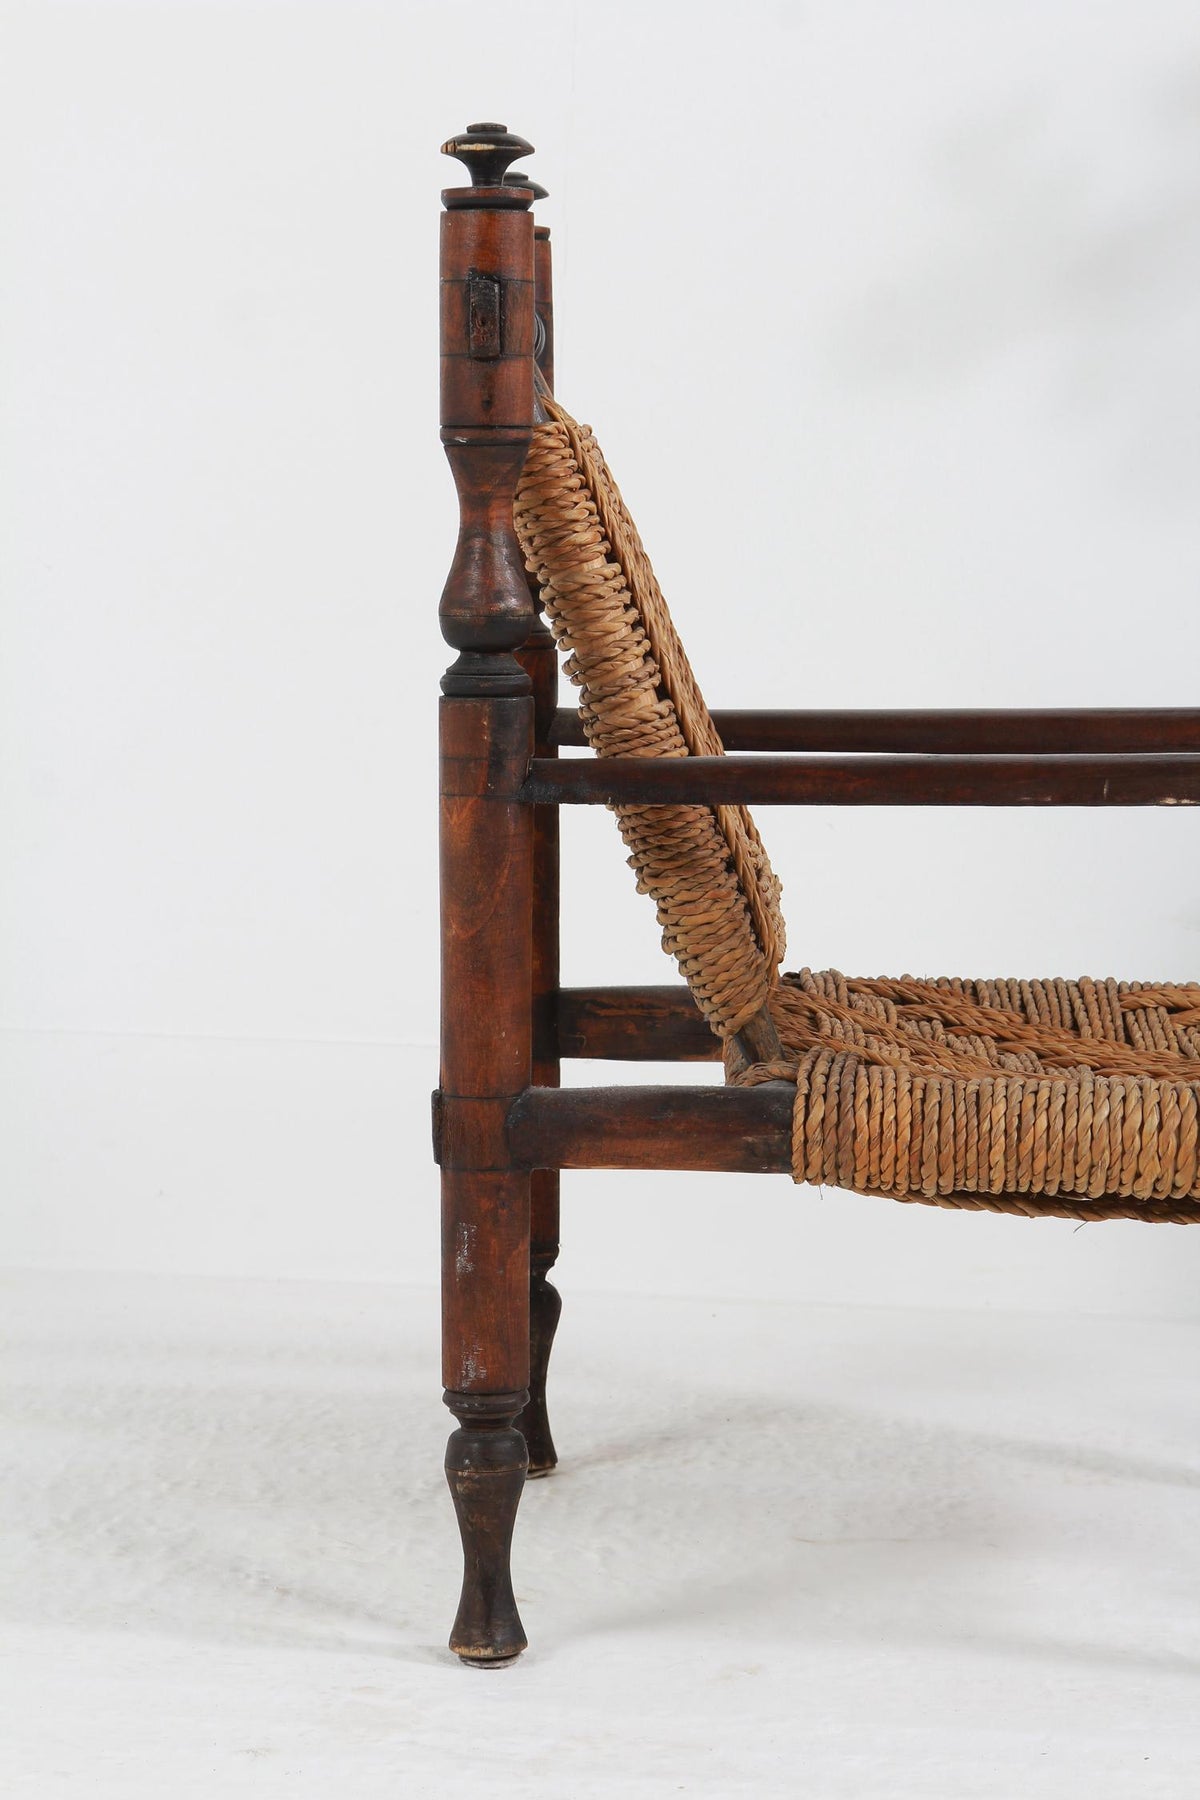 Elegant French Mid-Century Wood  & Rope Woven Armchair